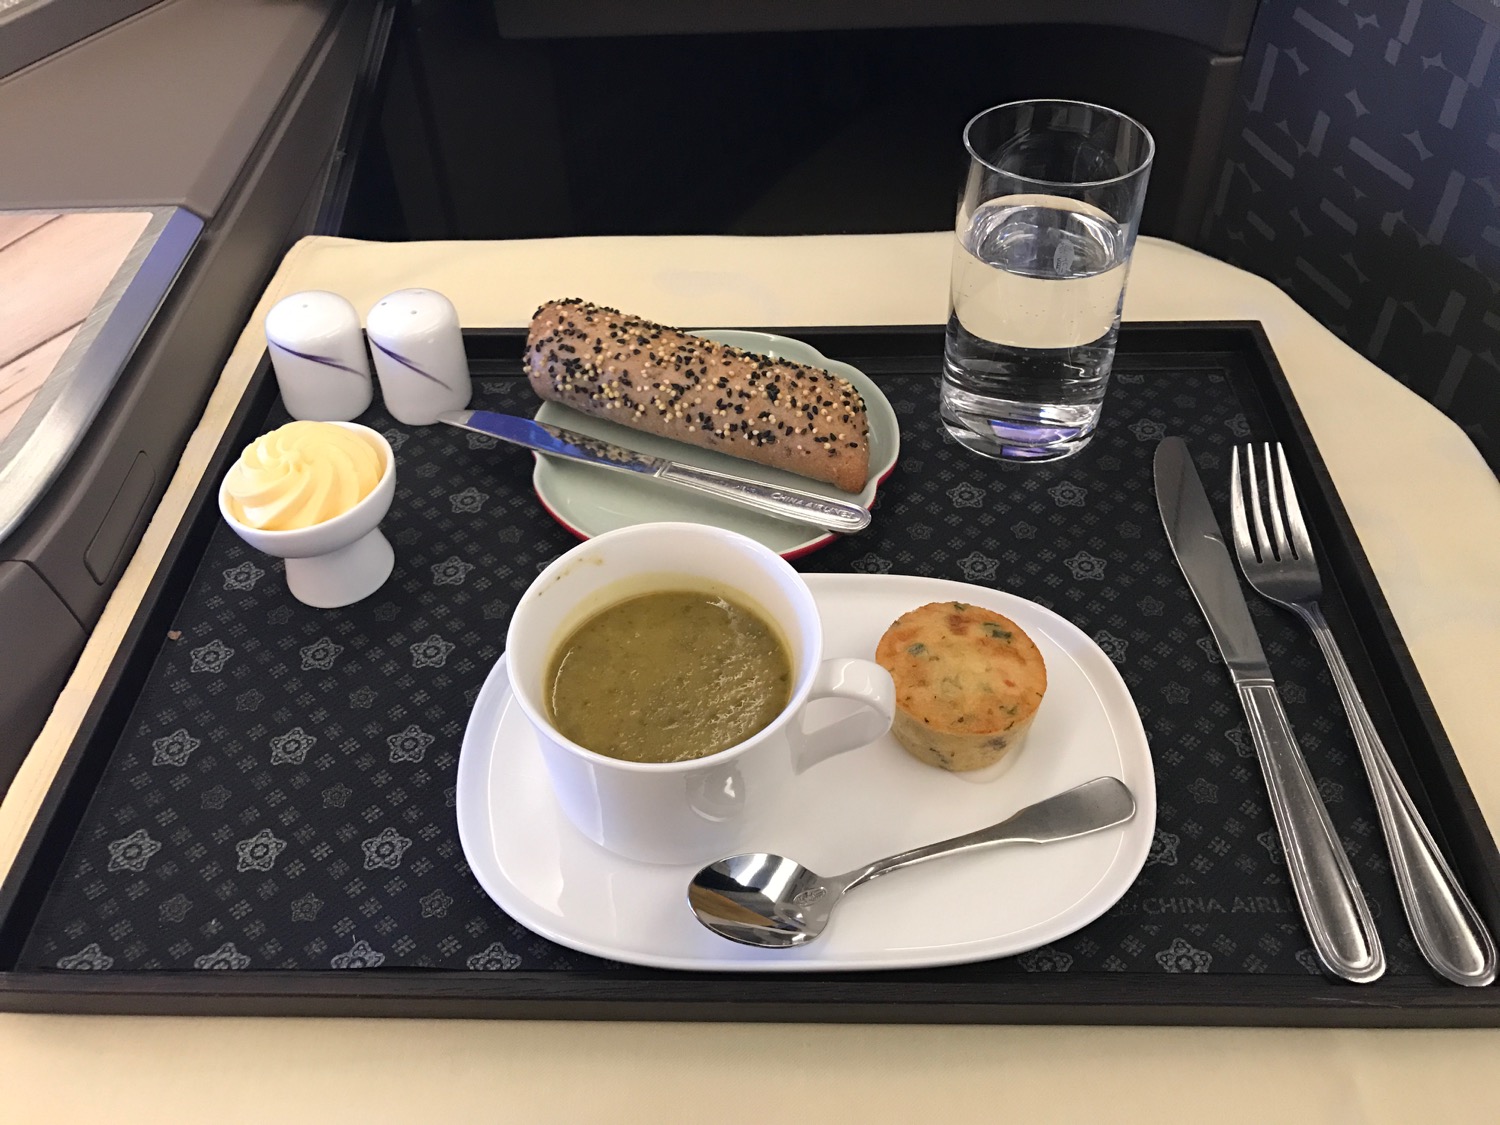 China Airlines A350 Business Class Review - 68